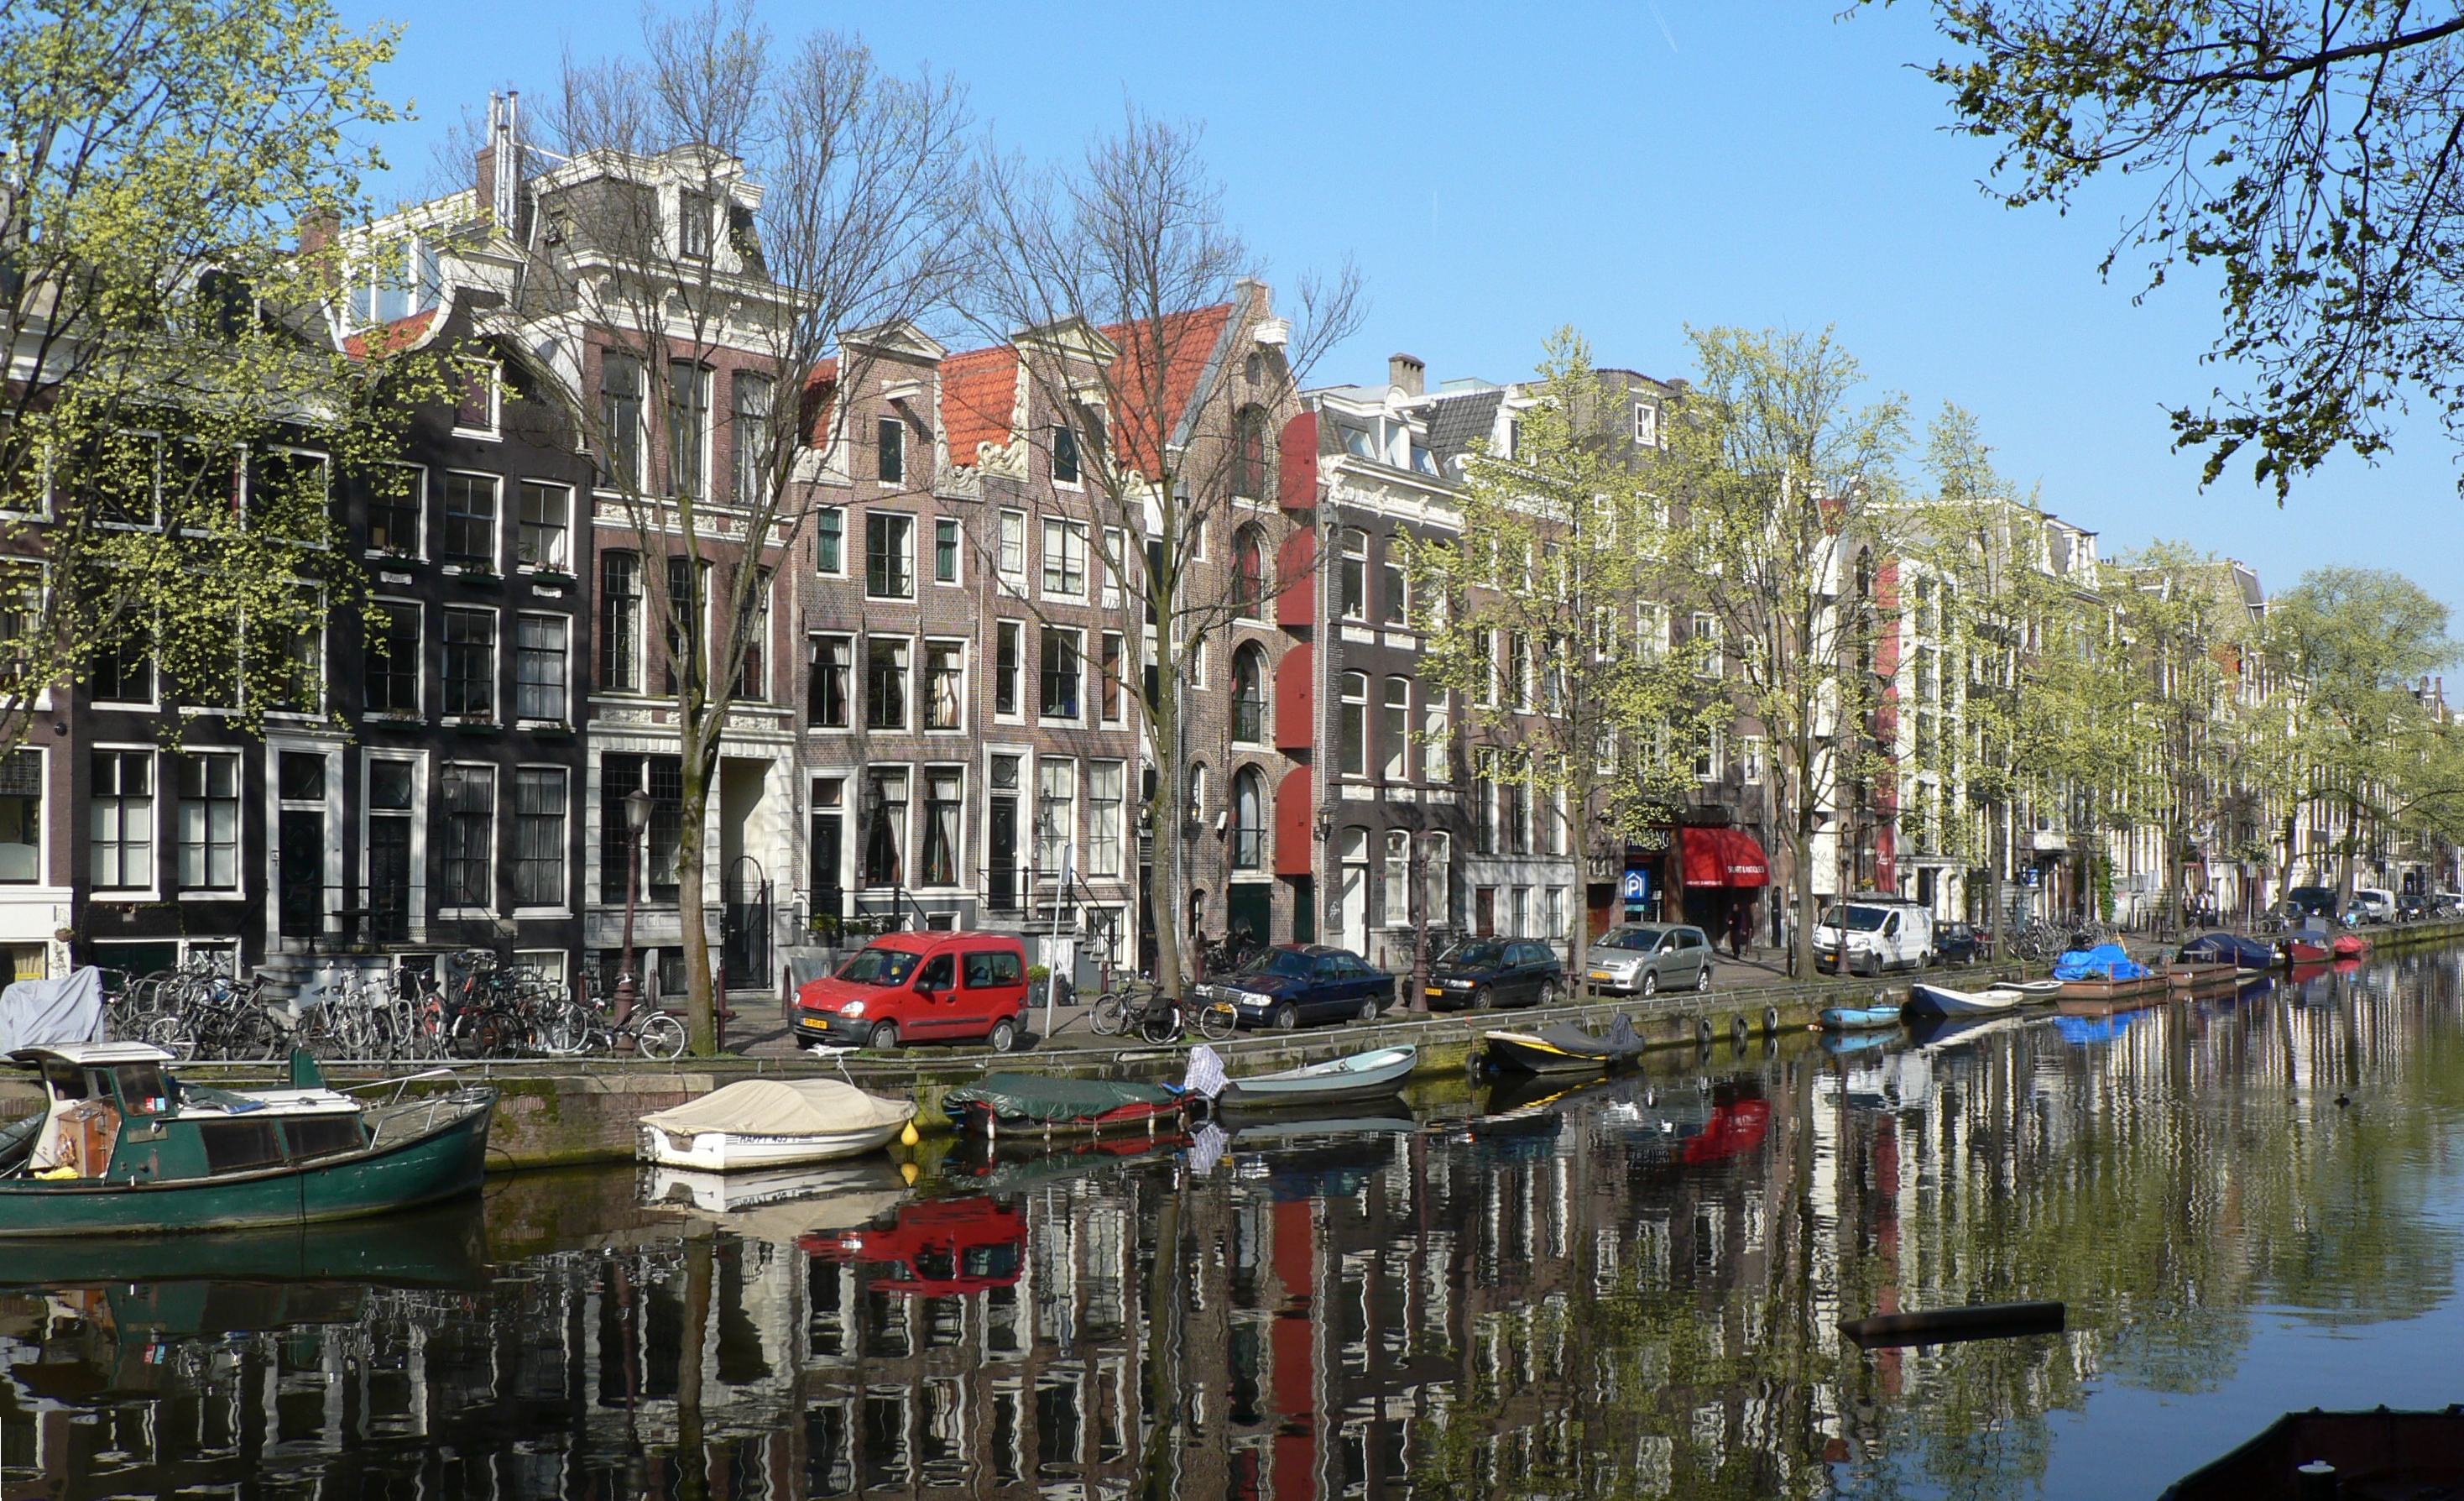 Amsterdam A Modern City To Travel To